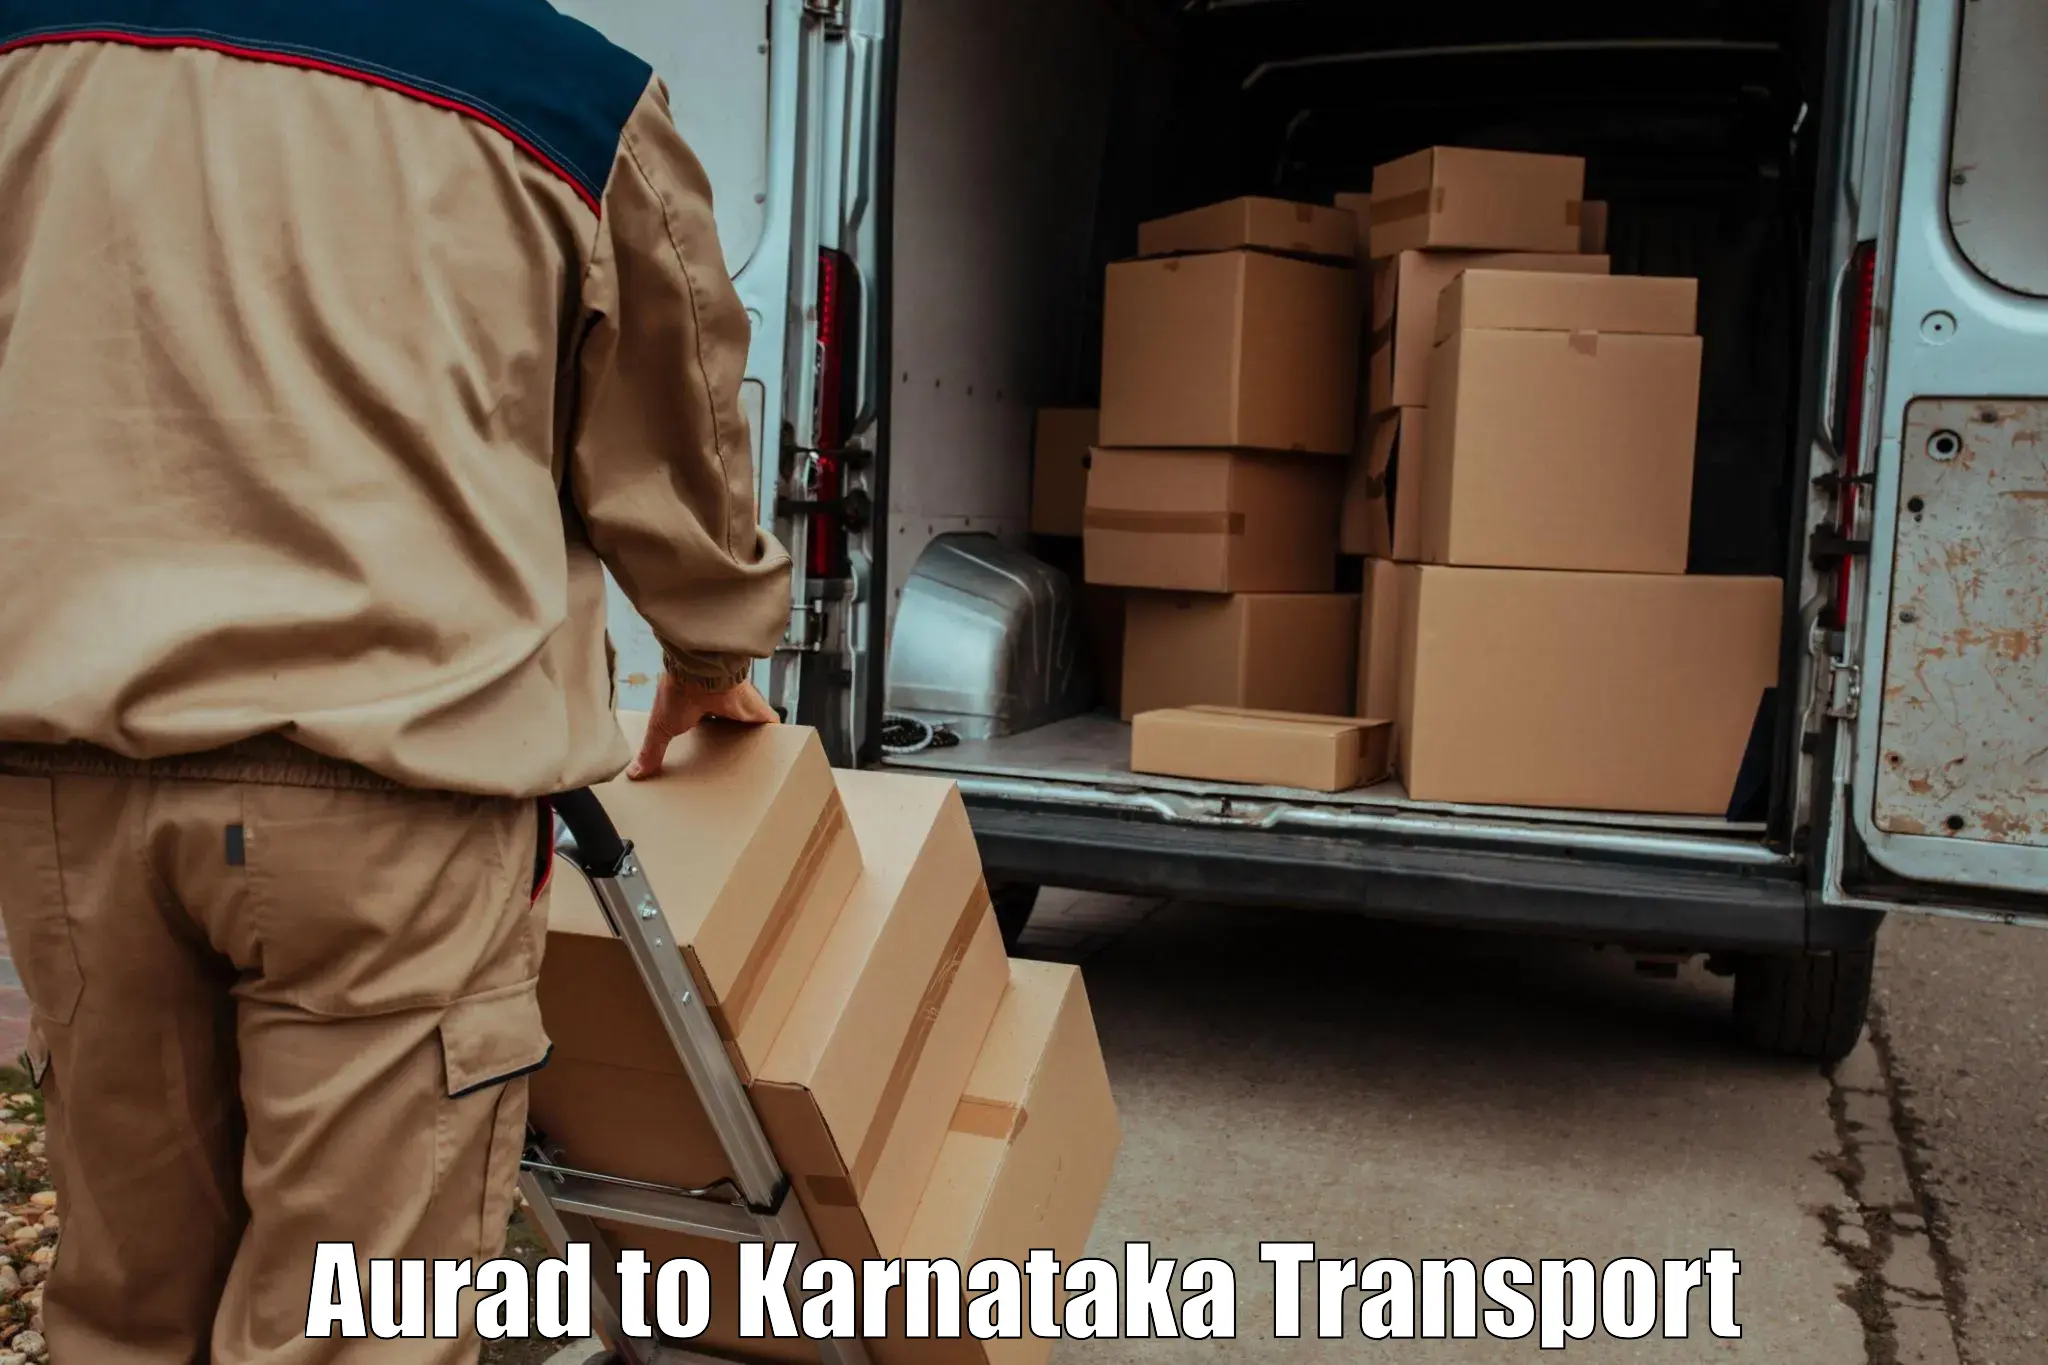 Lorry transport service Aurad to Manipal